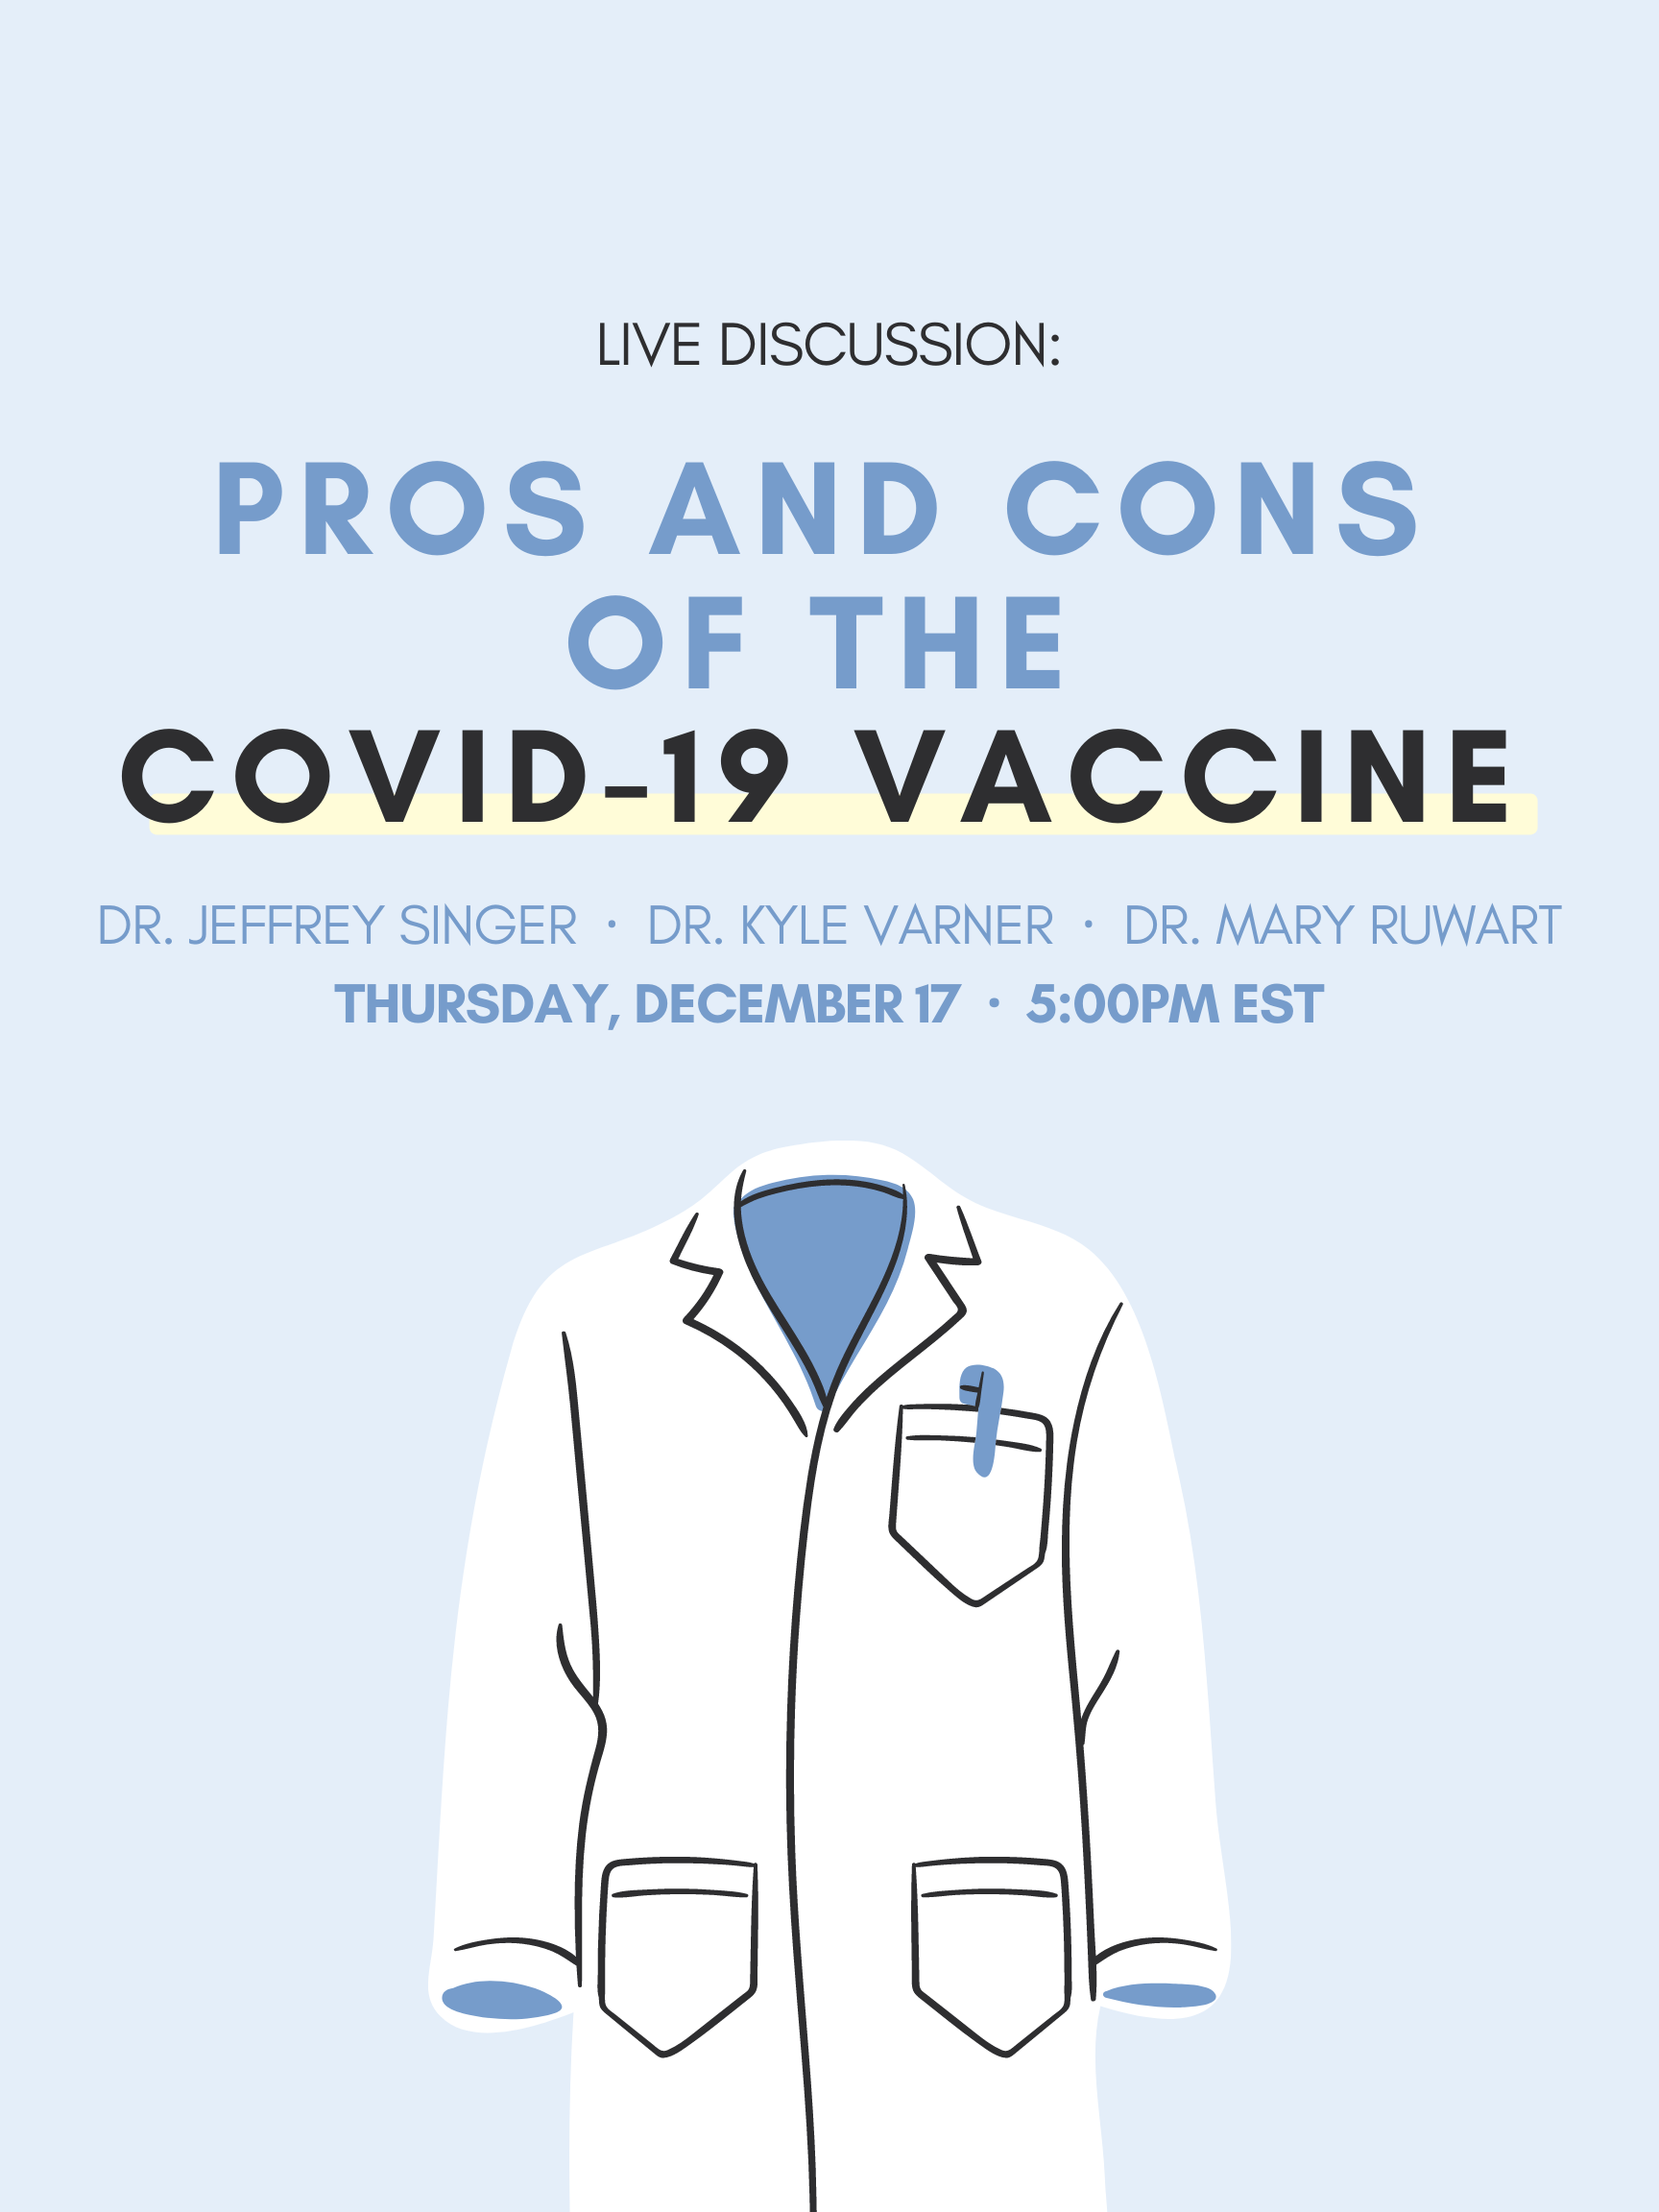 Panel Discussion: Pros and Cons of the COVID-19 Vaccine